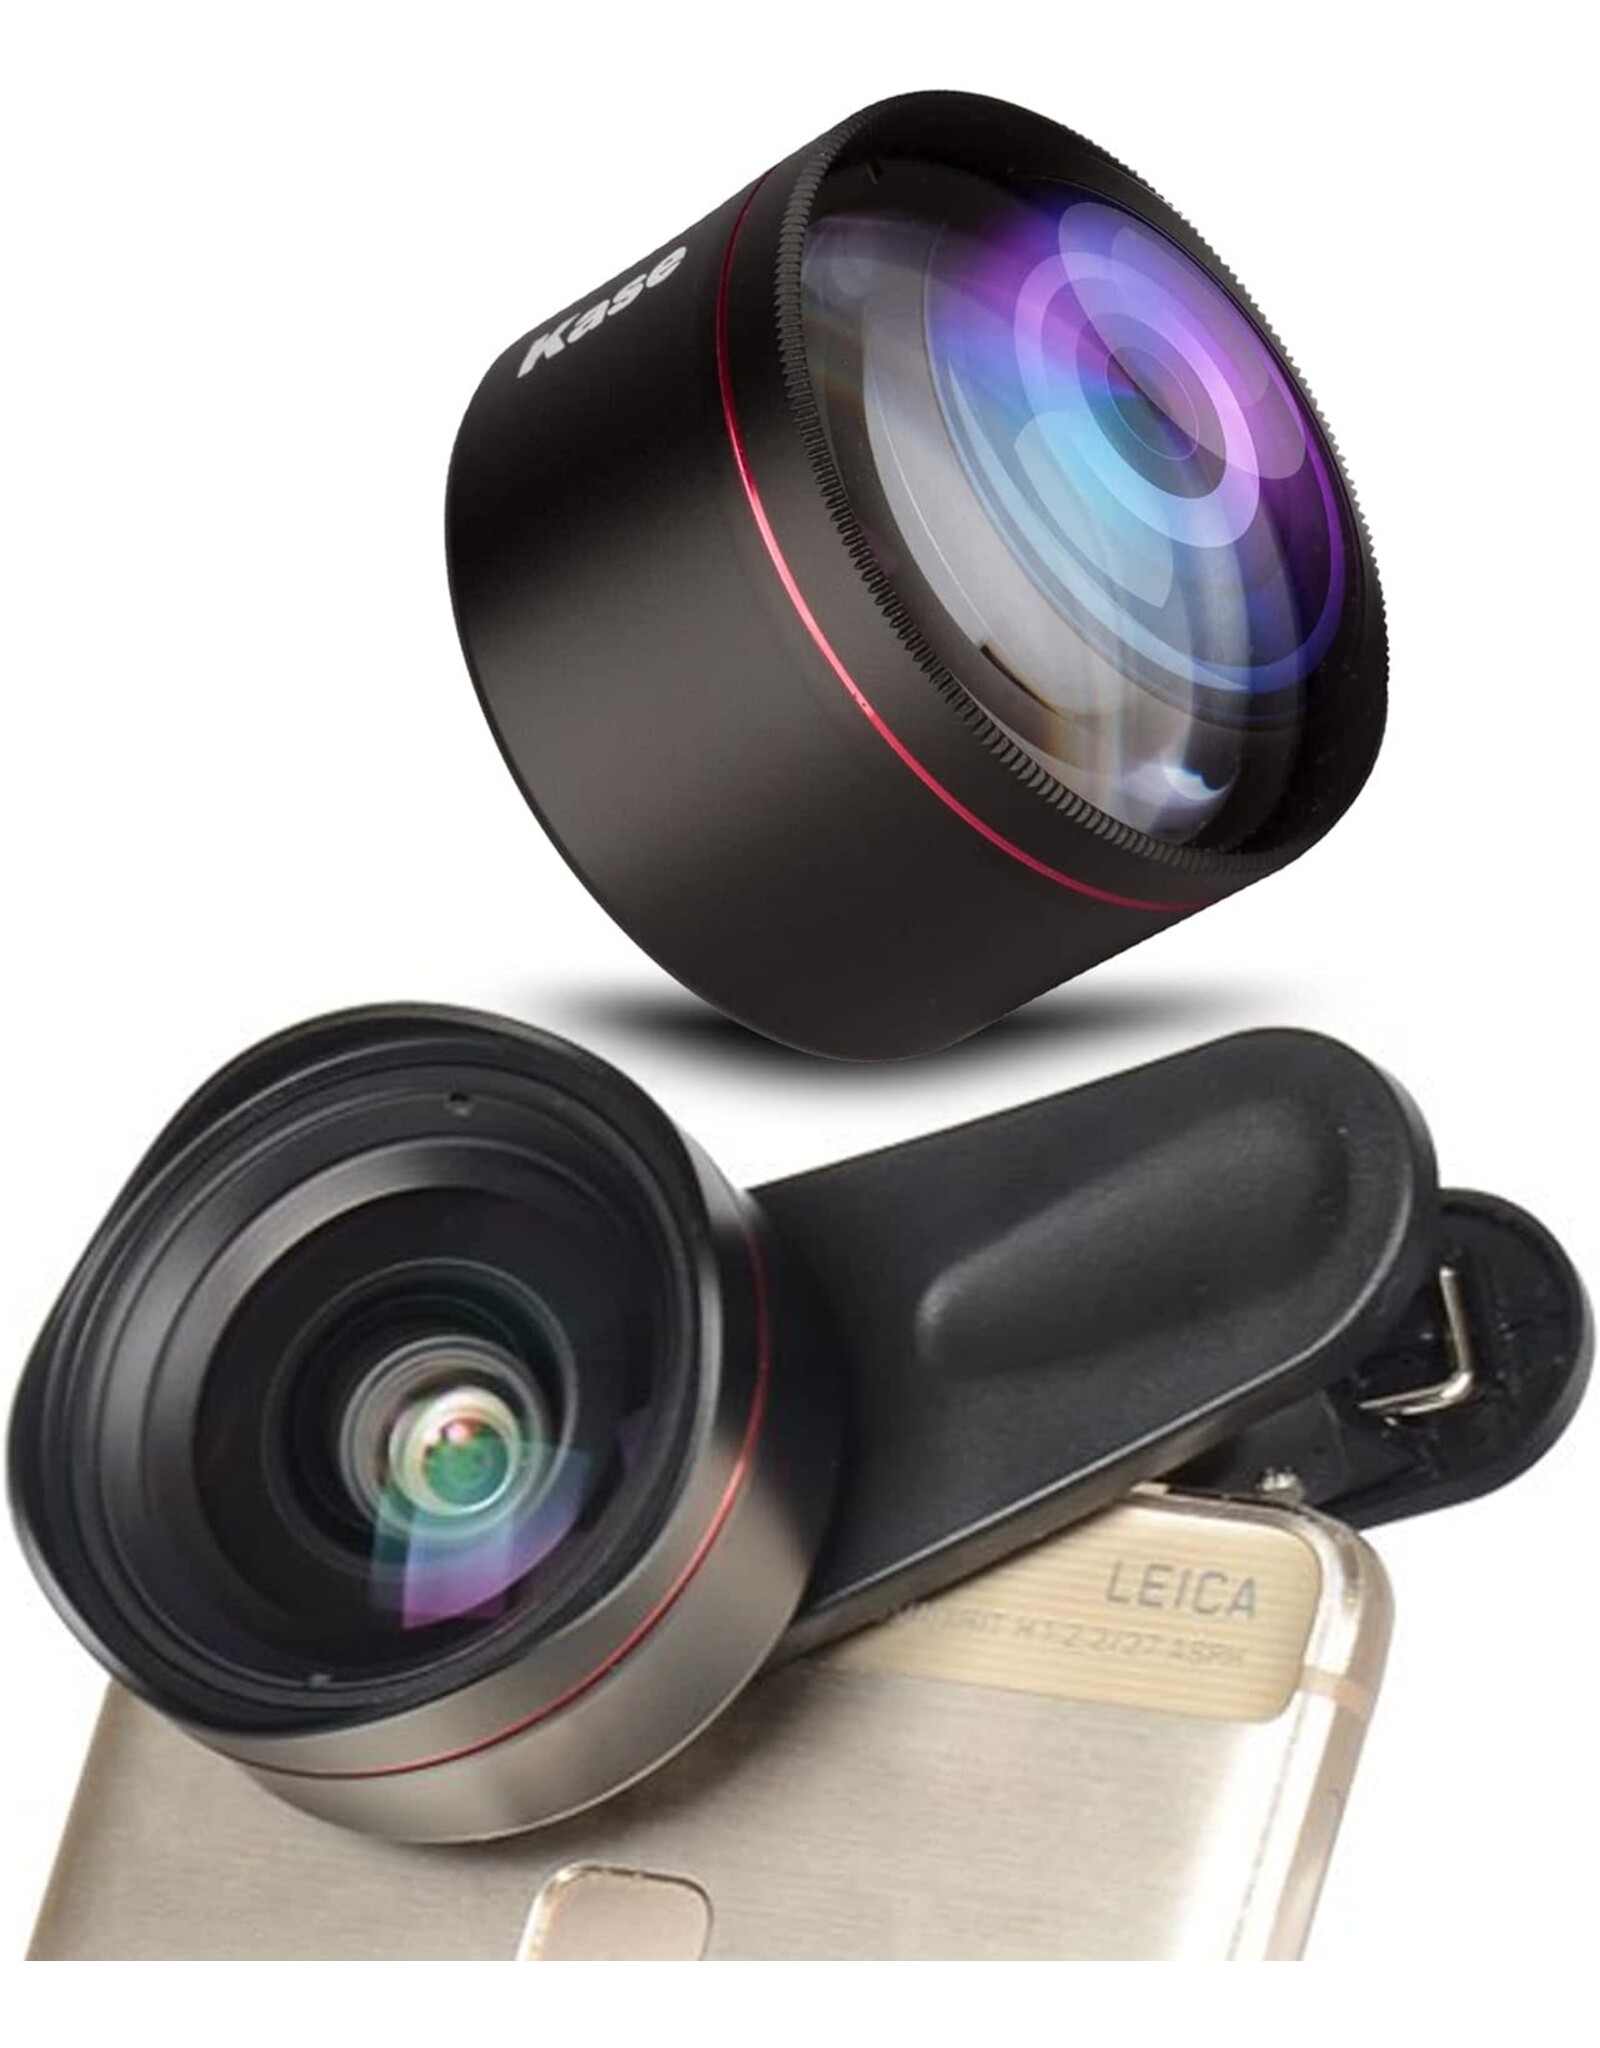 kASE Kase 3X Telephoto Lens | Zoom Attachment for Android or iPhone Smartphones